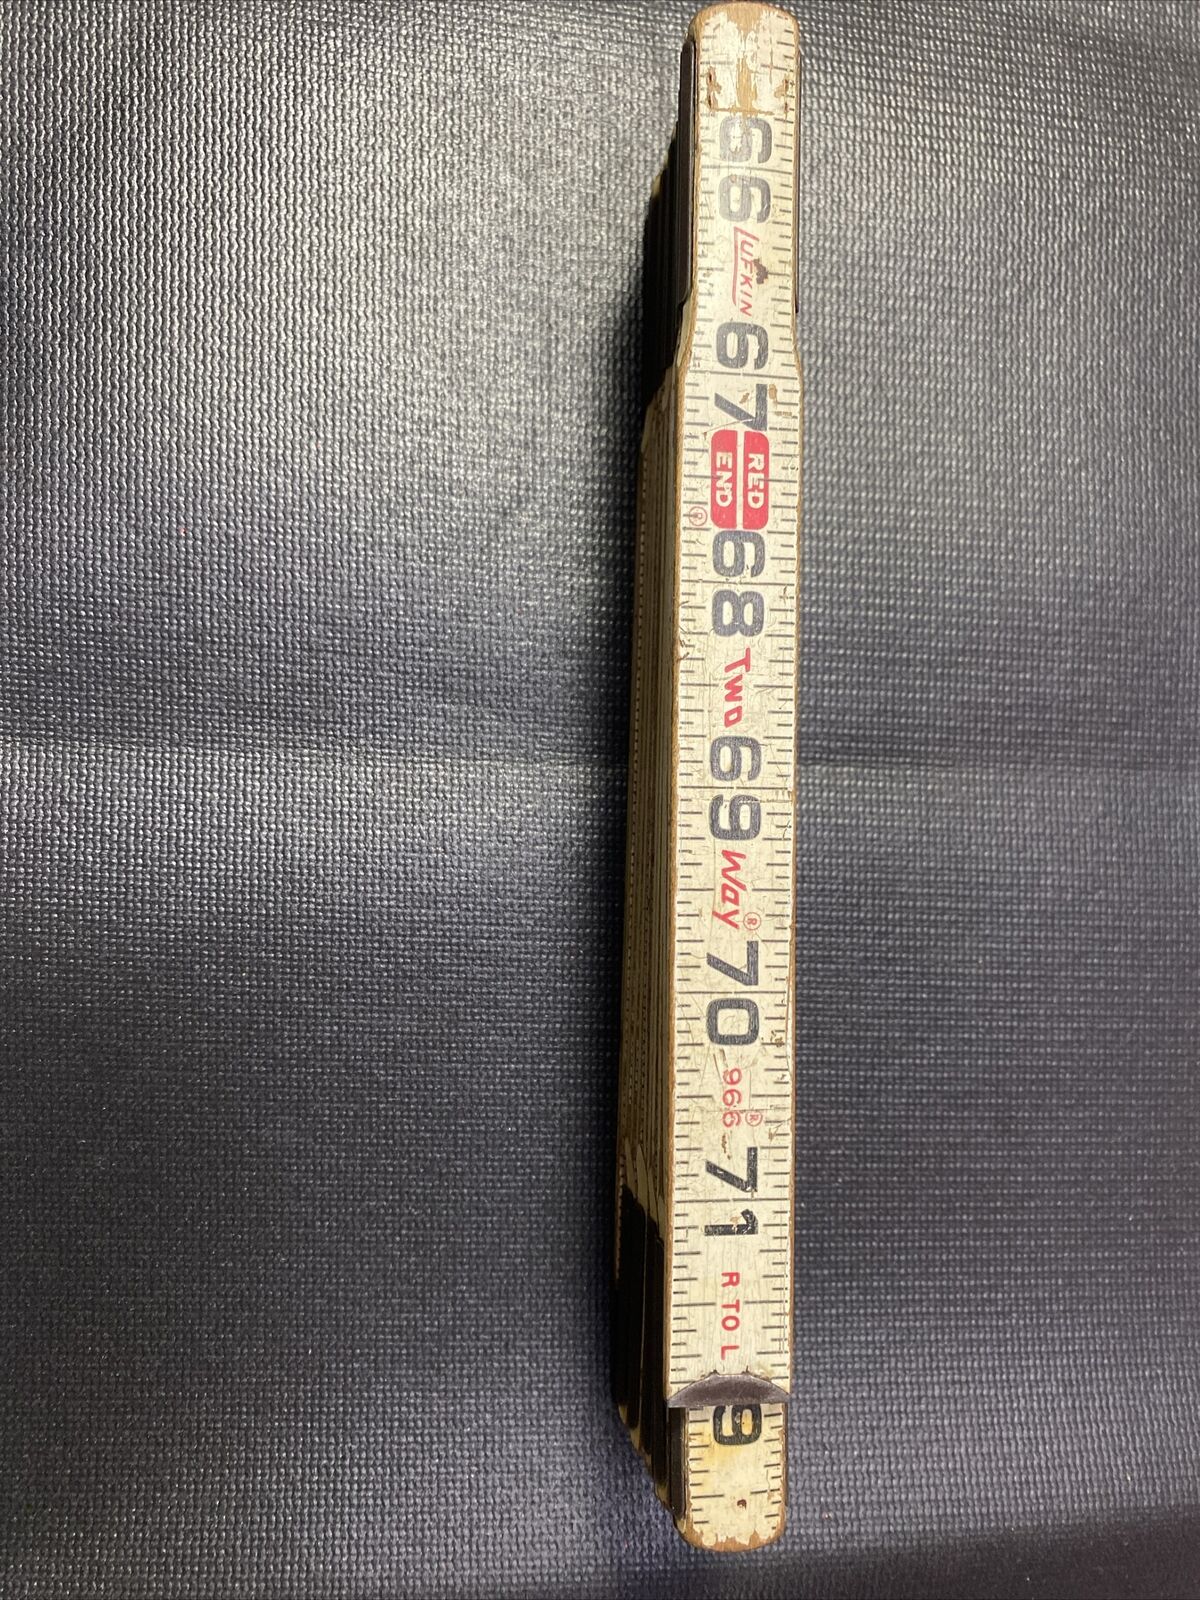 Vintage Lufkin Two Way Red End Folding Wood Tape Measure Ruler - #966 72 inches